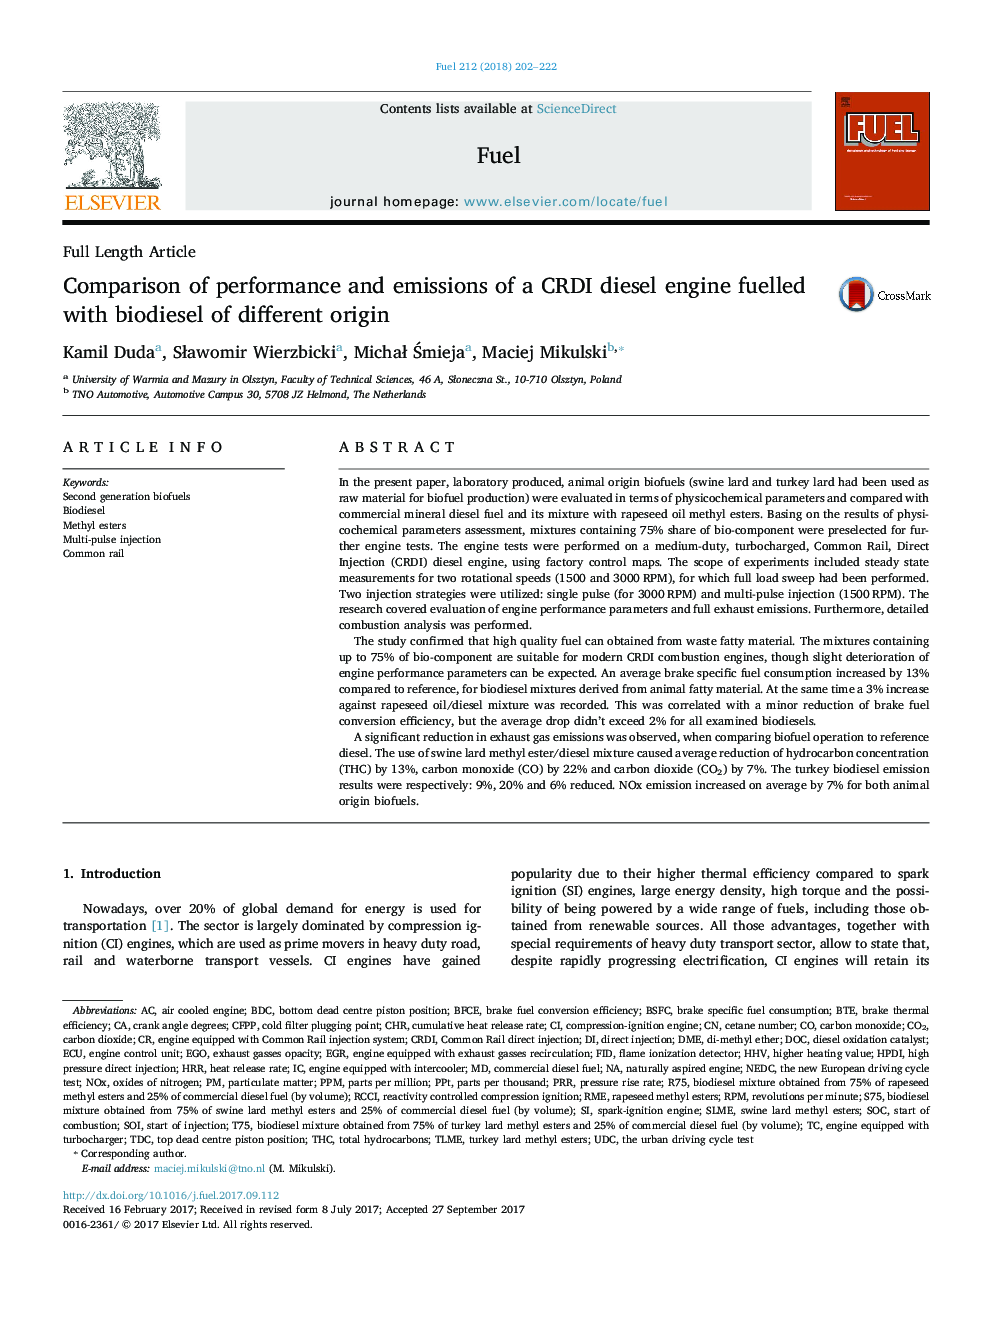 Comparison of performance and emissions of a CRDI diesel engine fuelled with biodiesel of different origin